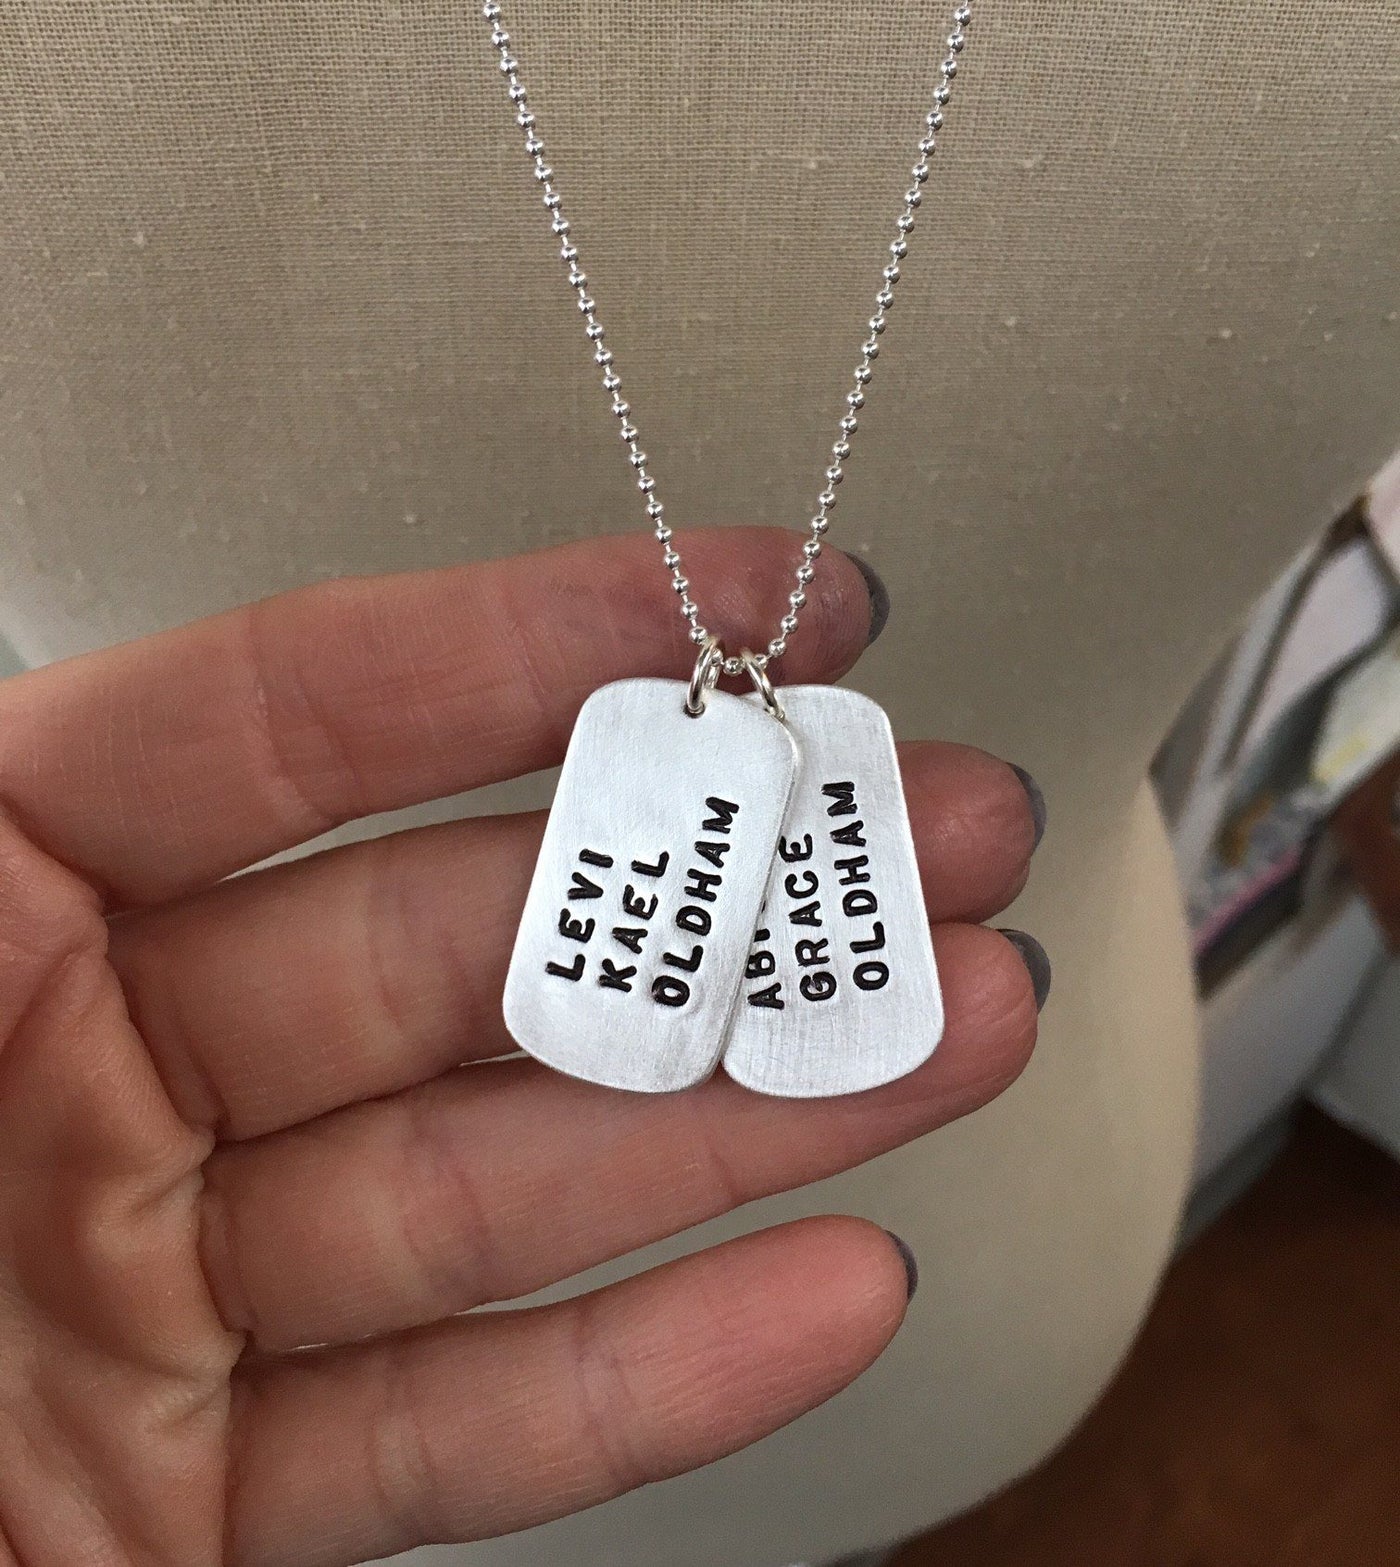 Dog Tag Necklace with Coordinates